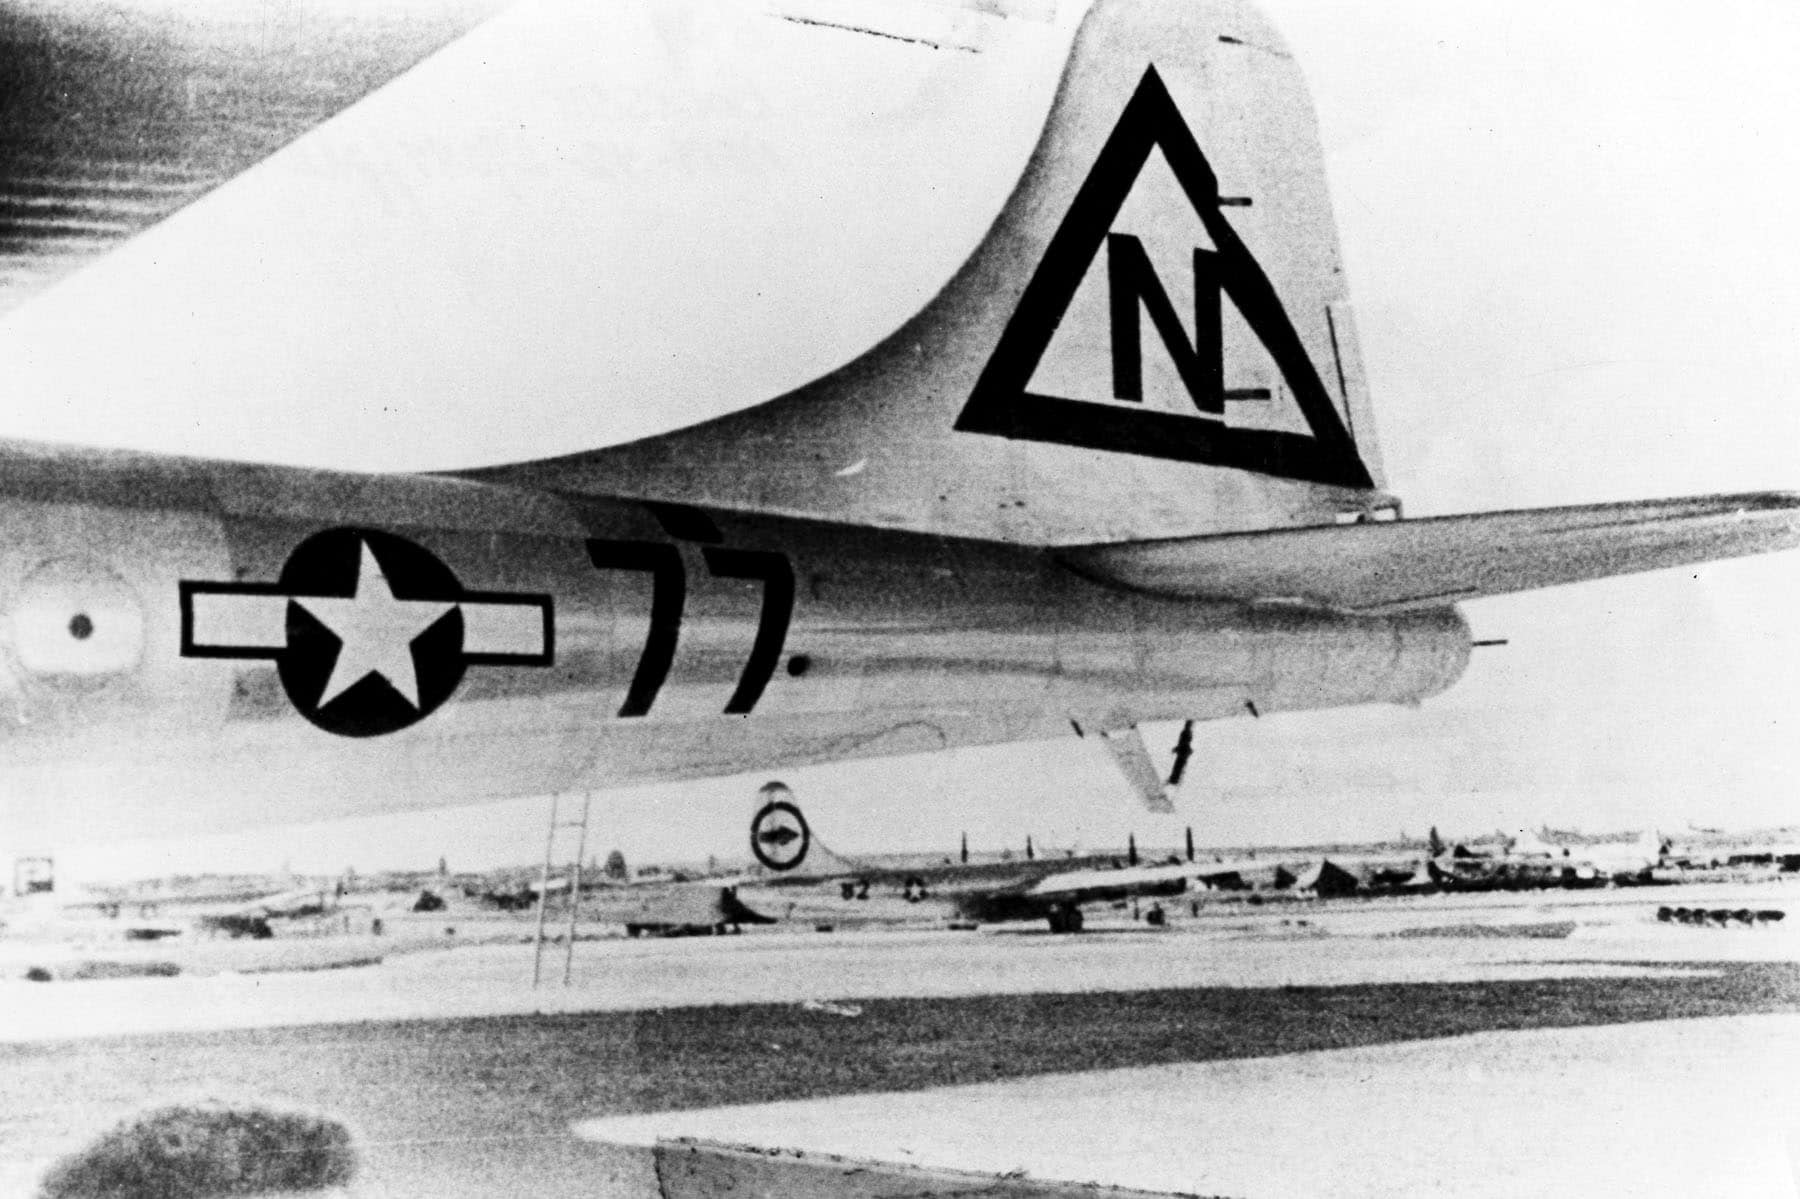 "Bockscar" tail section, showing temporary markings replacing those of the 509th on Tinian to confuse the enemy. (U.S. Air Force photo)